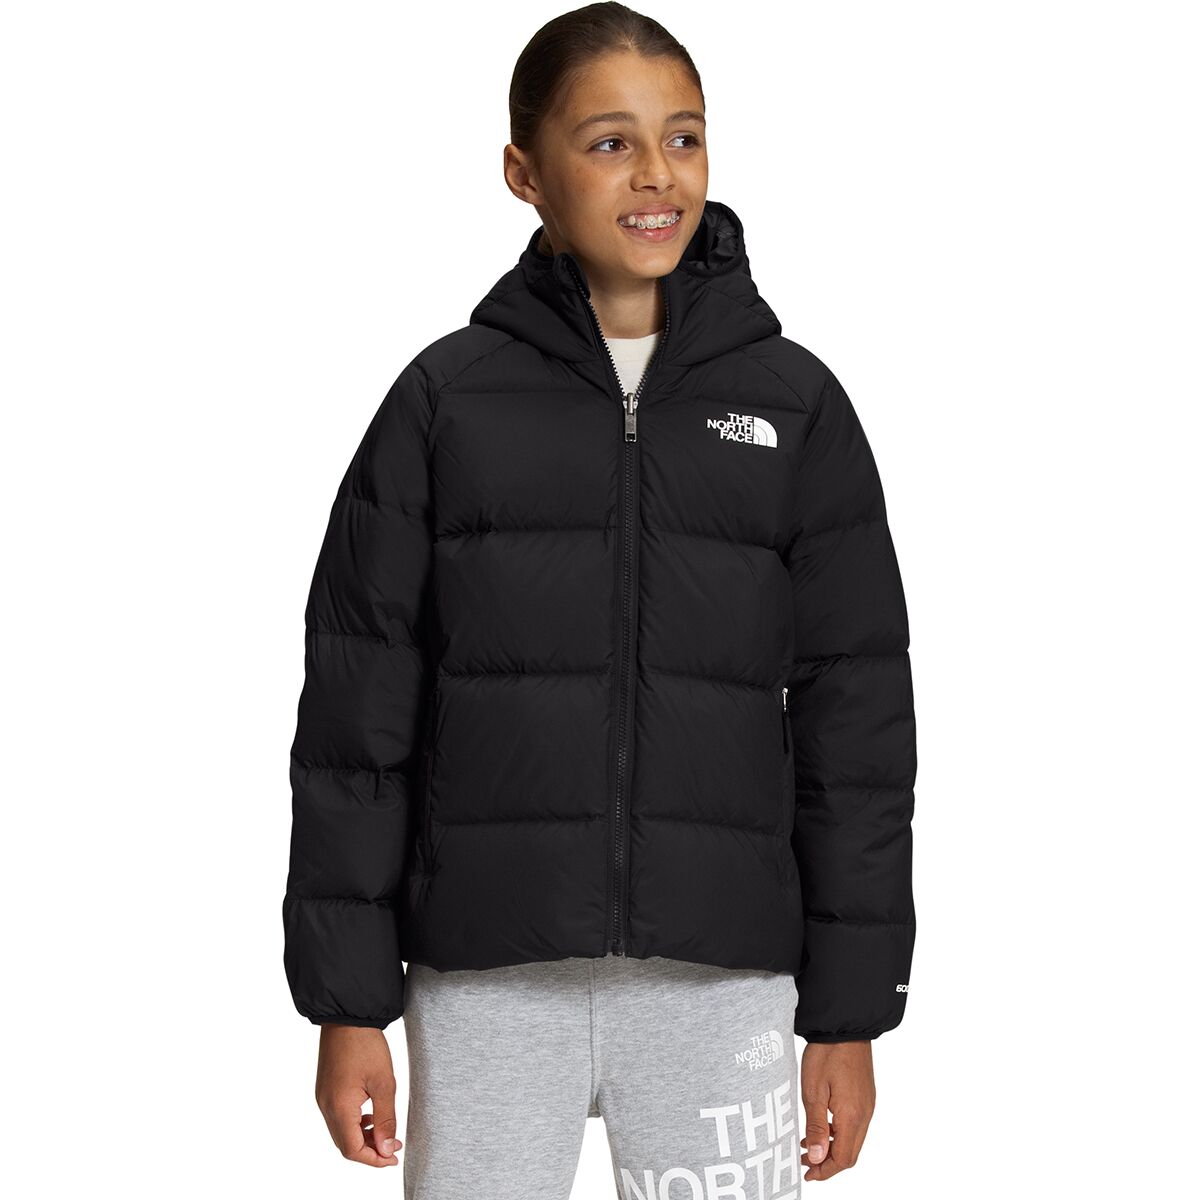 The North Face North Down Hooded Reversible Print Jacket - Boys'